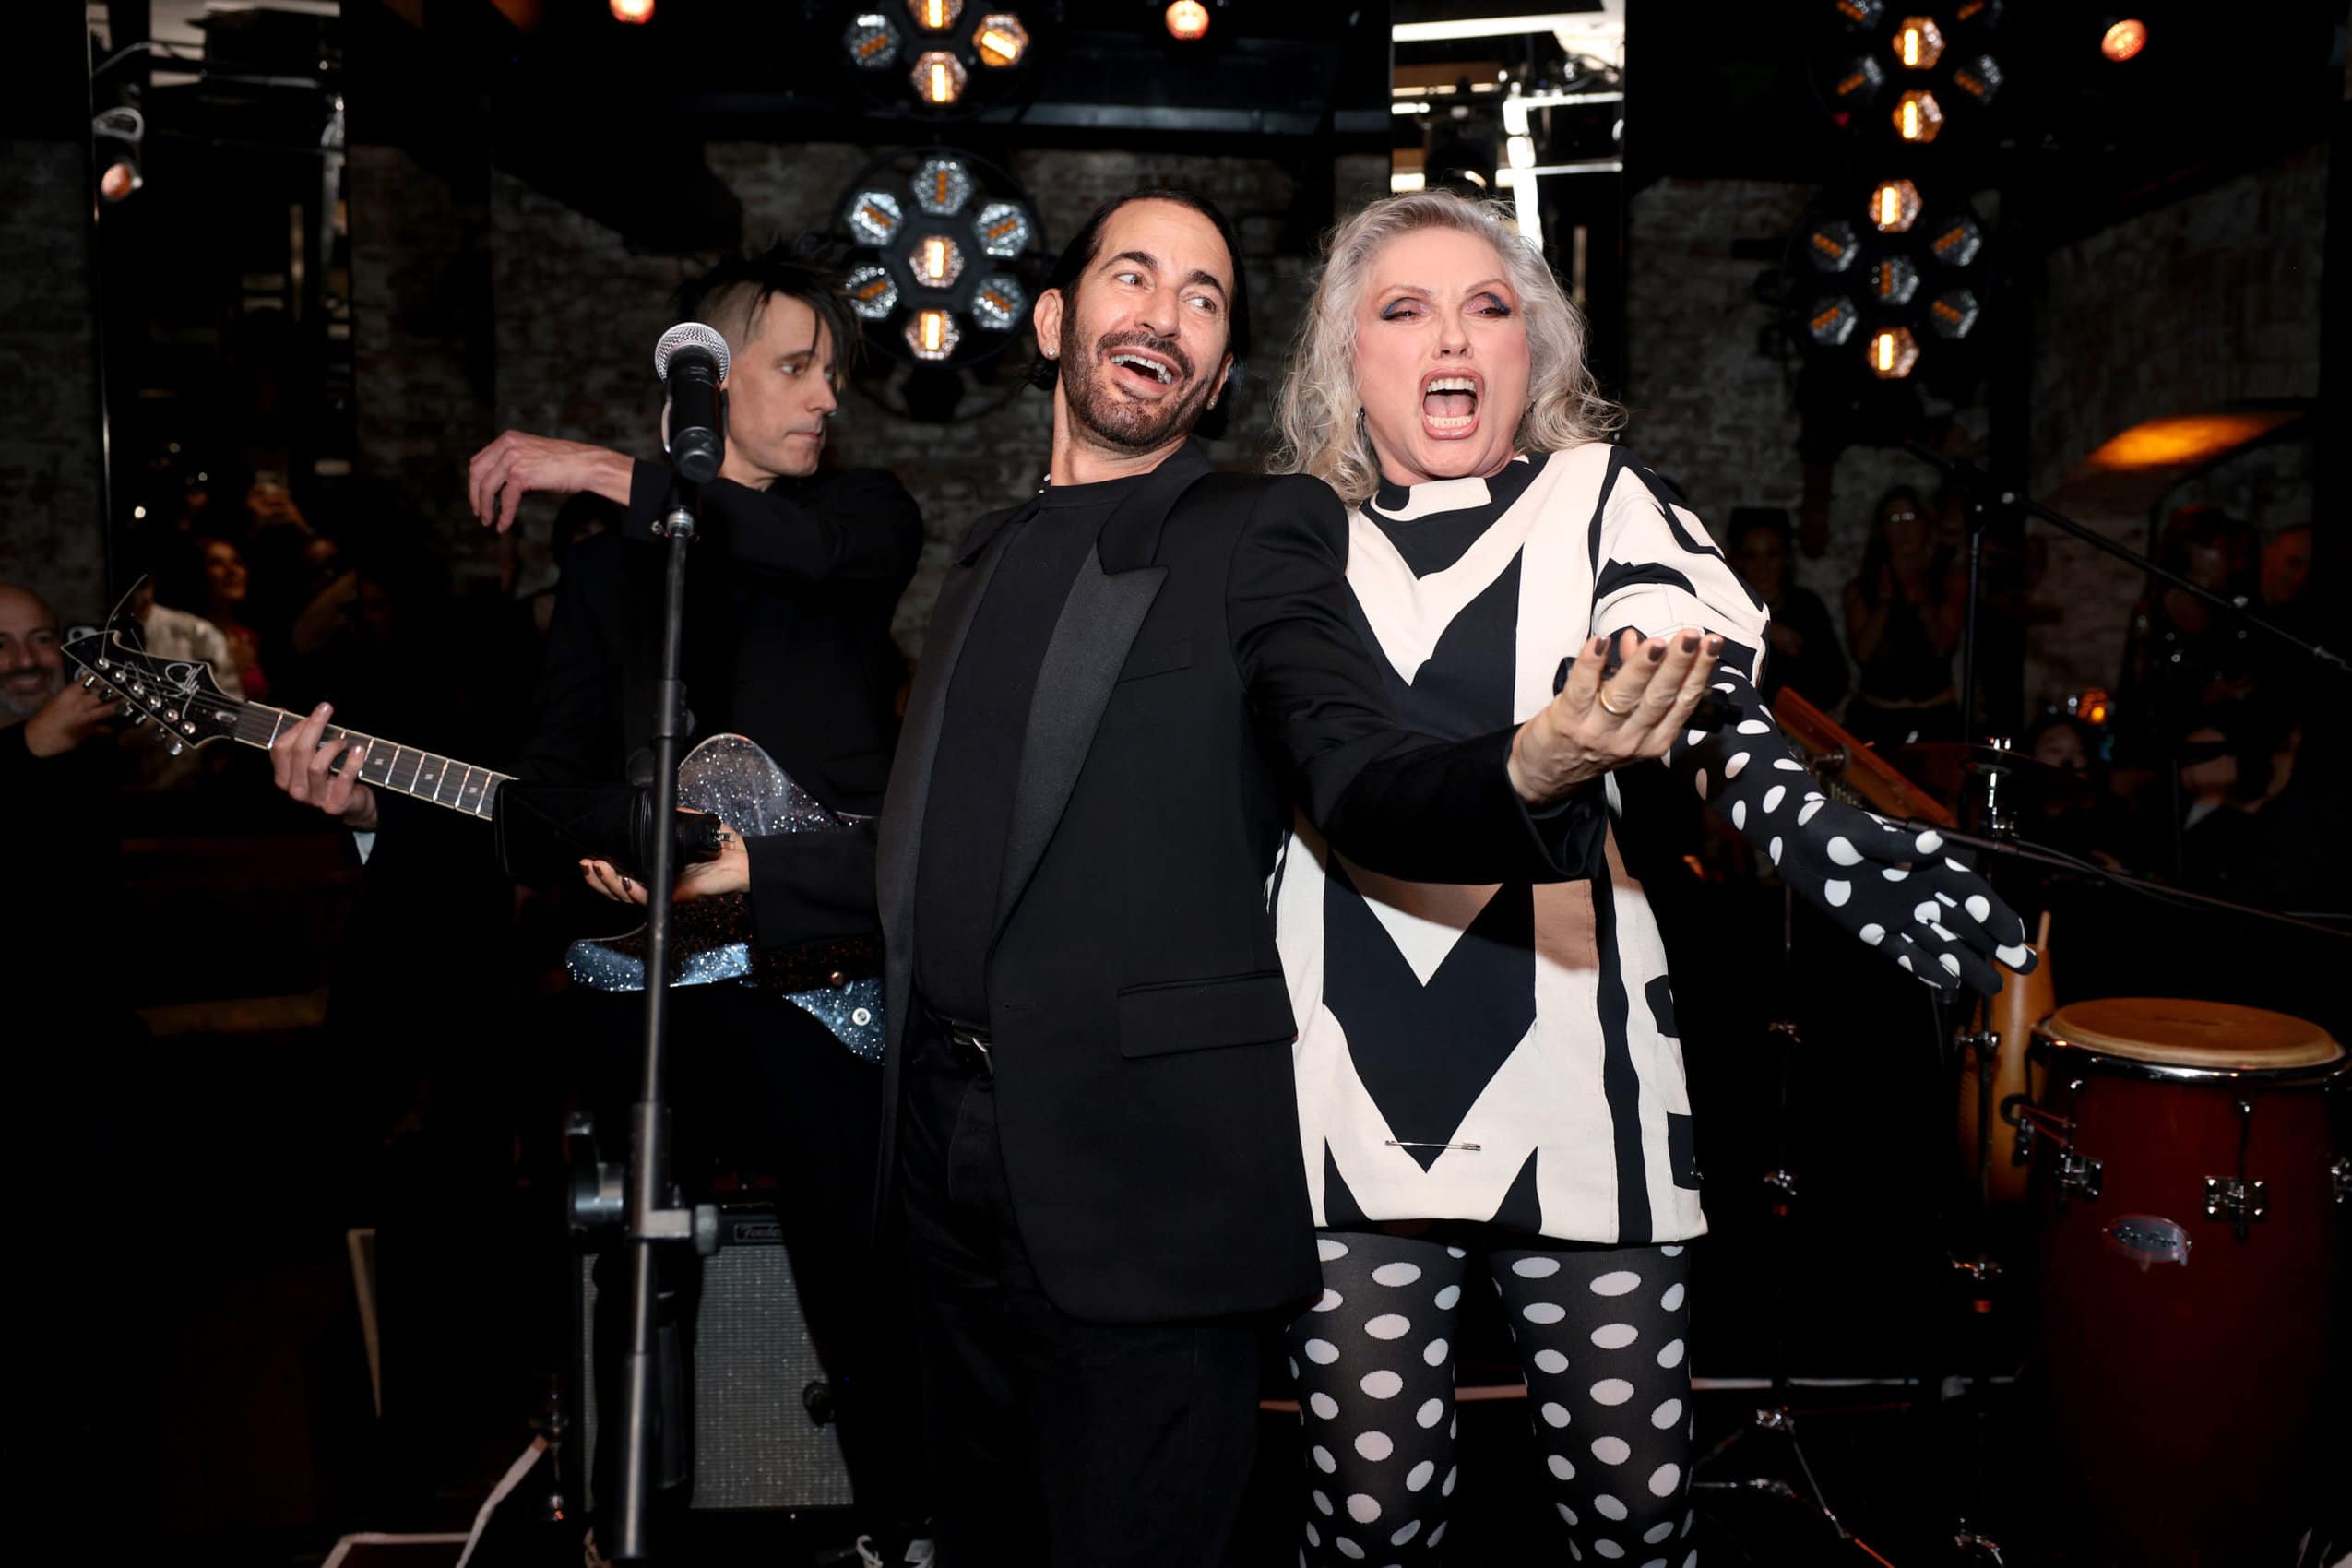 Marc Jacobs Parties At Submercer With Debbie Harry, Artizia’s Power Lunch, Ring Concierge Celebrates 10 Years, Plus! The Latest From Grover Rad In LA…